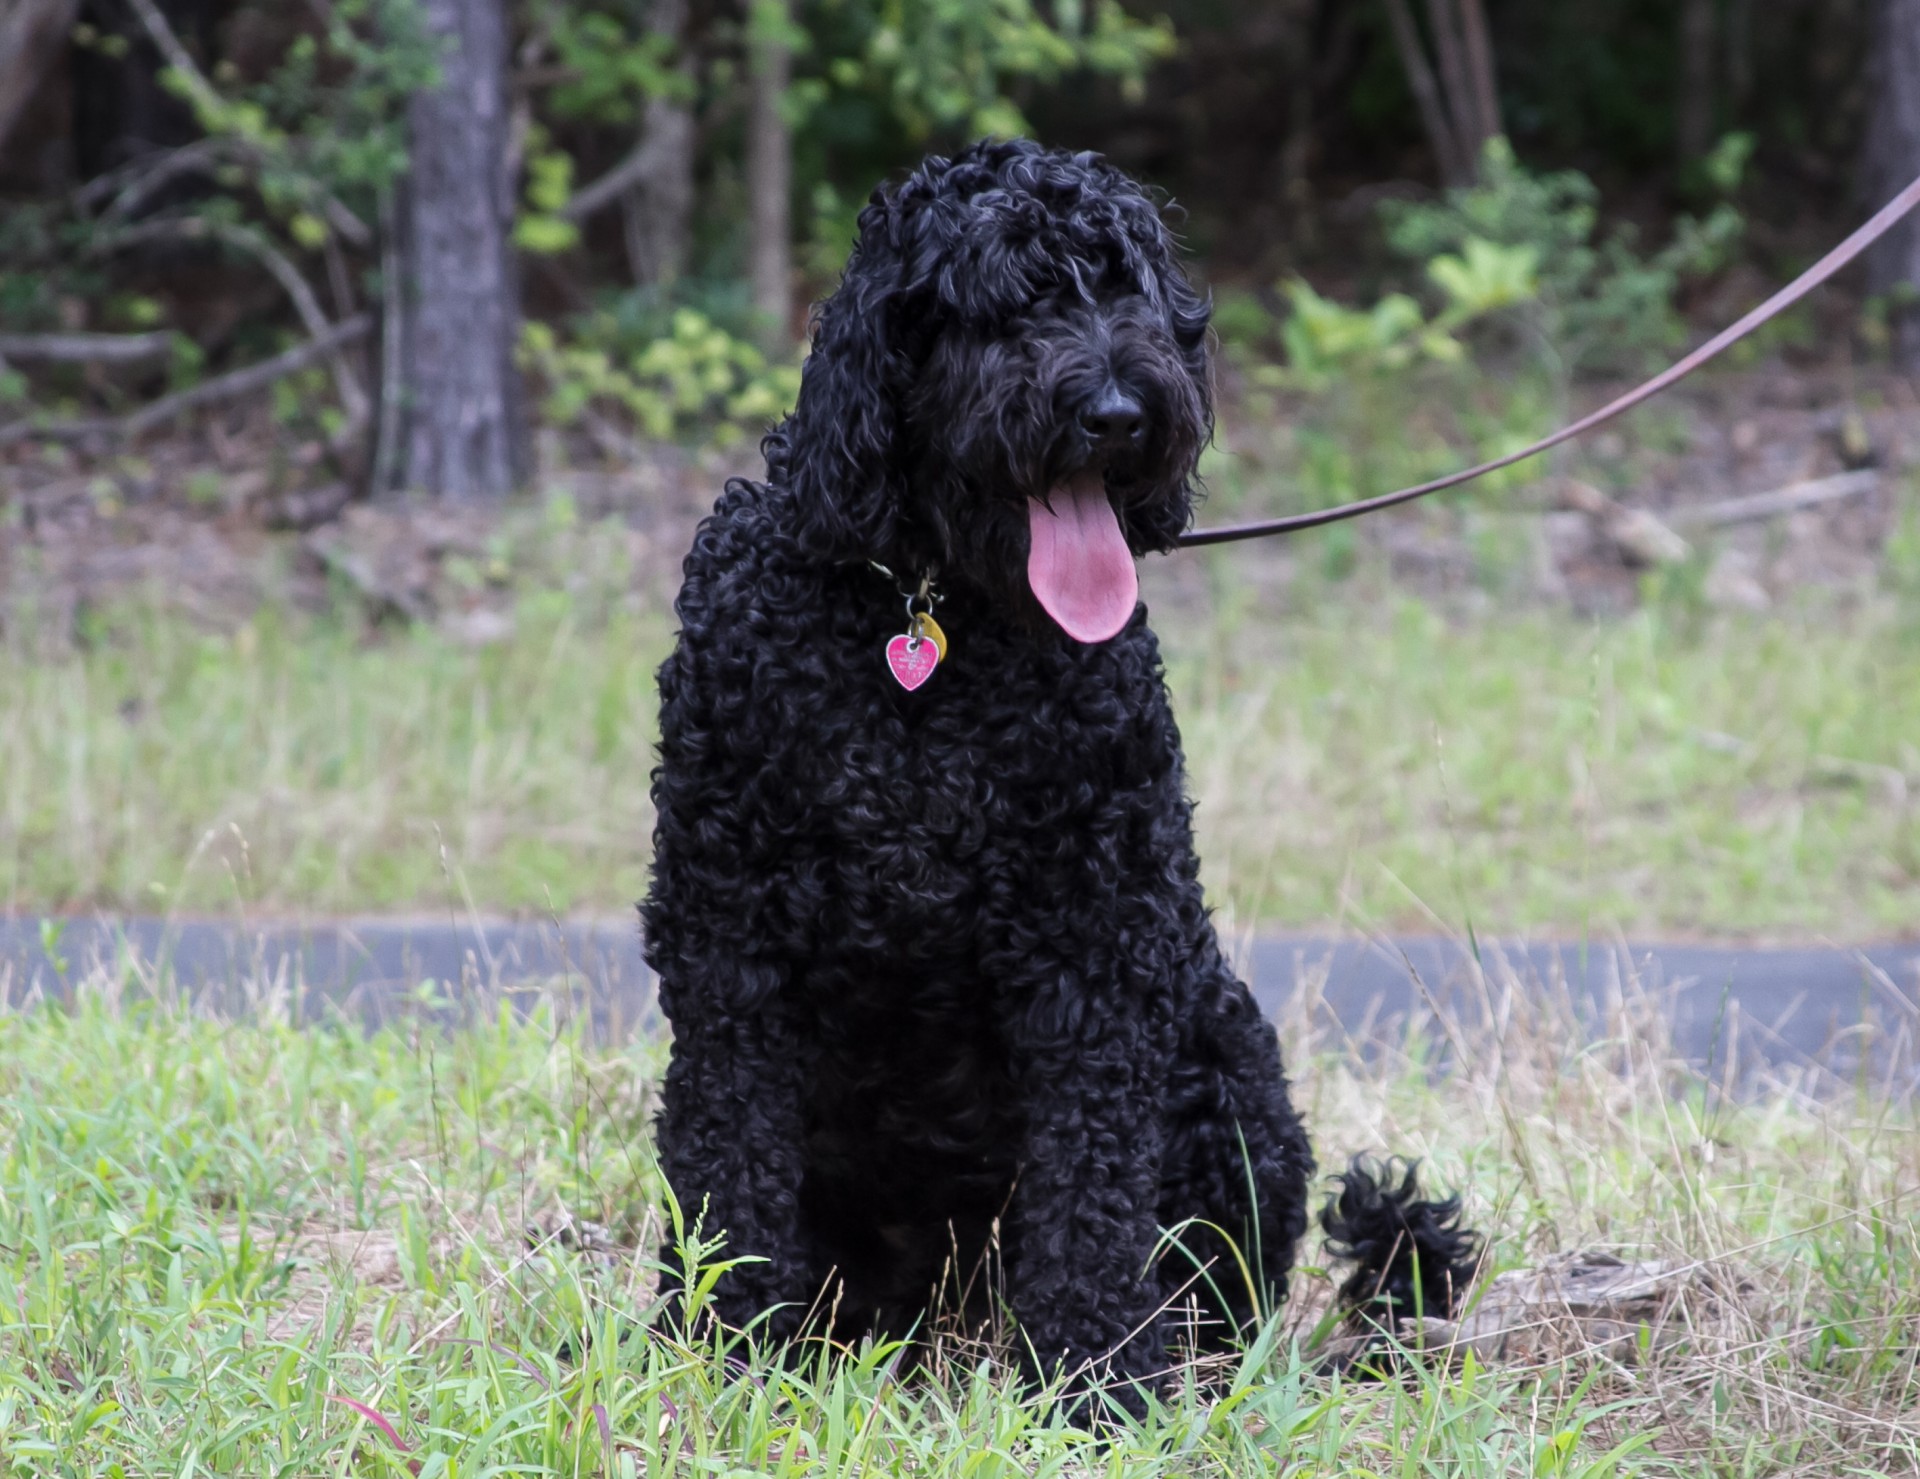 Schnoodle is a designer breed created by breeding black schnauzer to poodles.